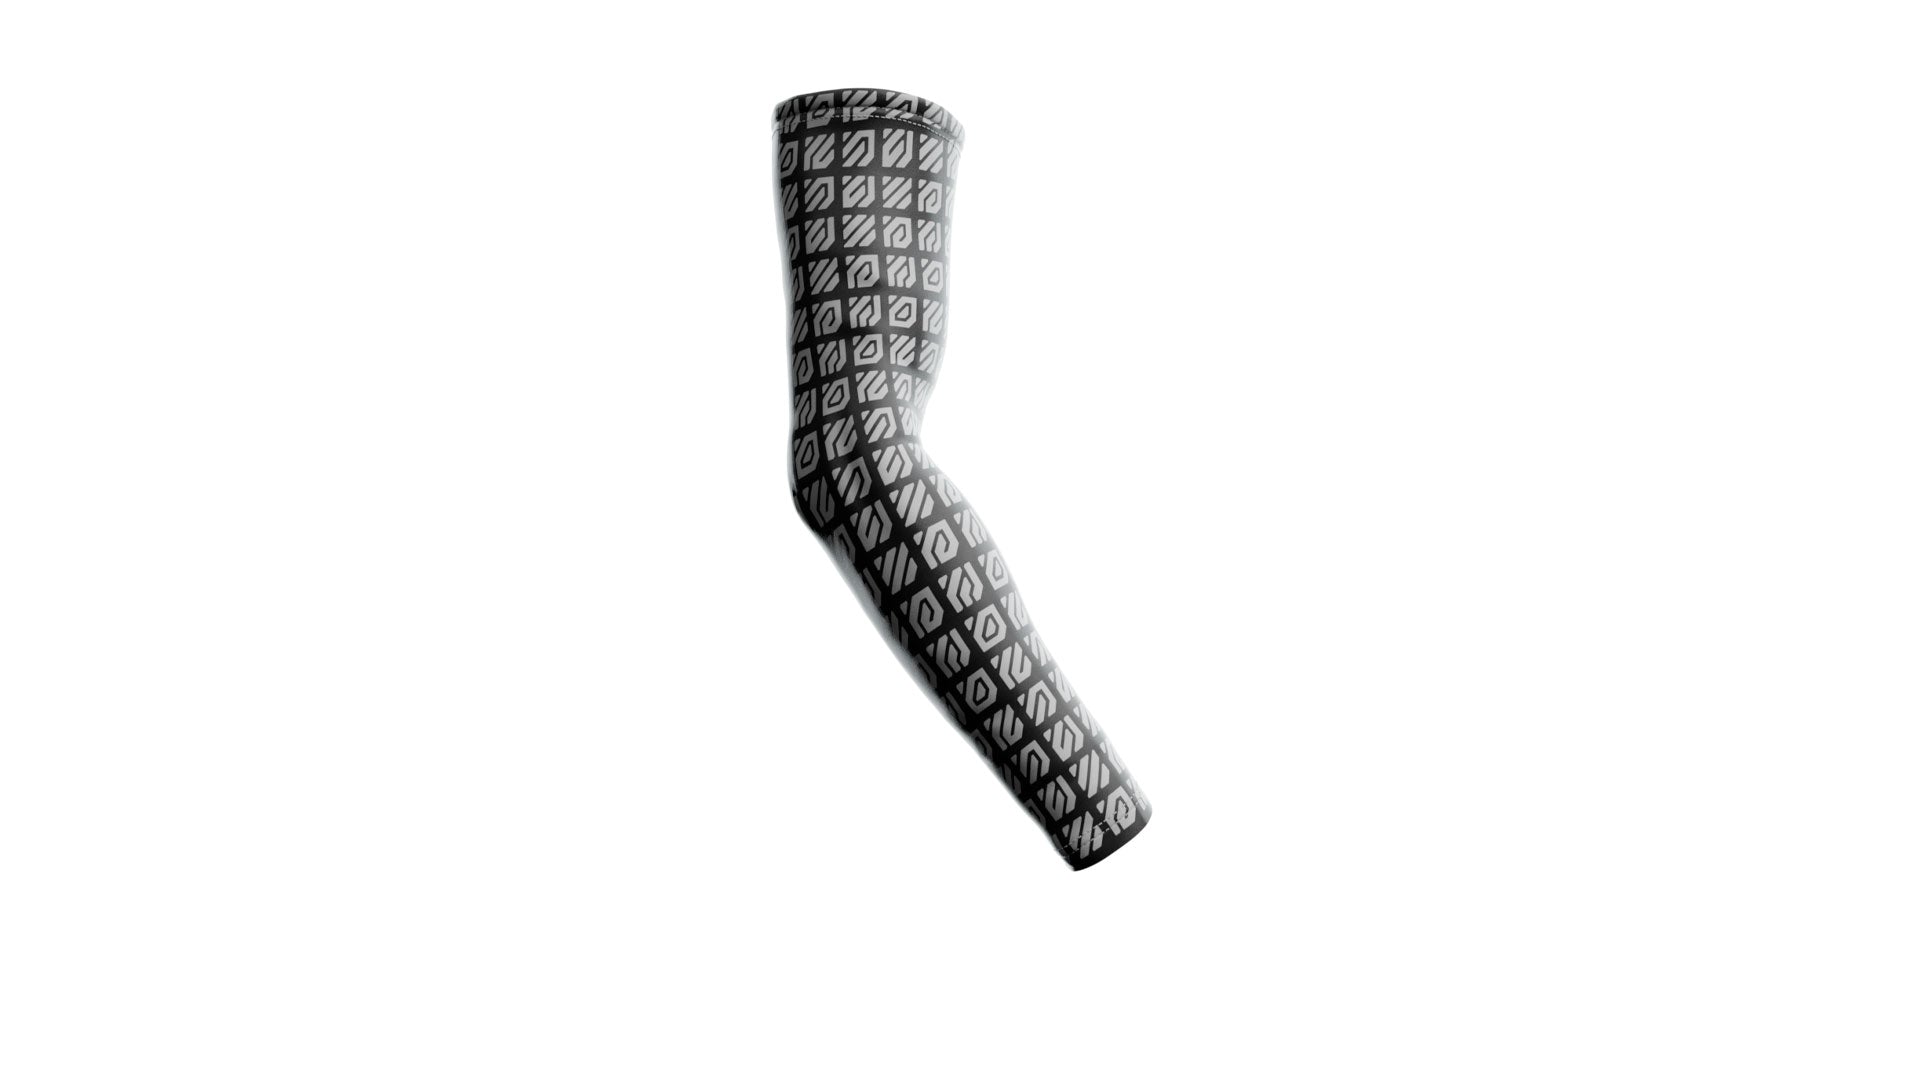 A black and white gaming arm compression sleeve